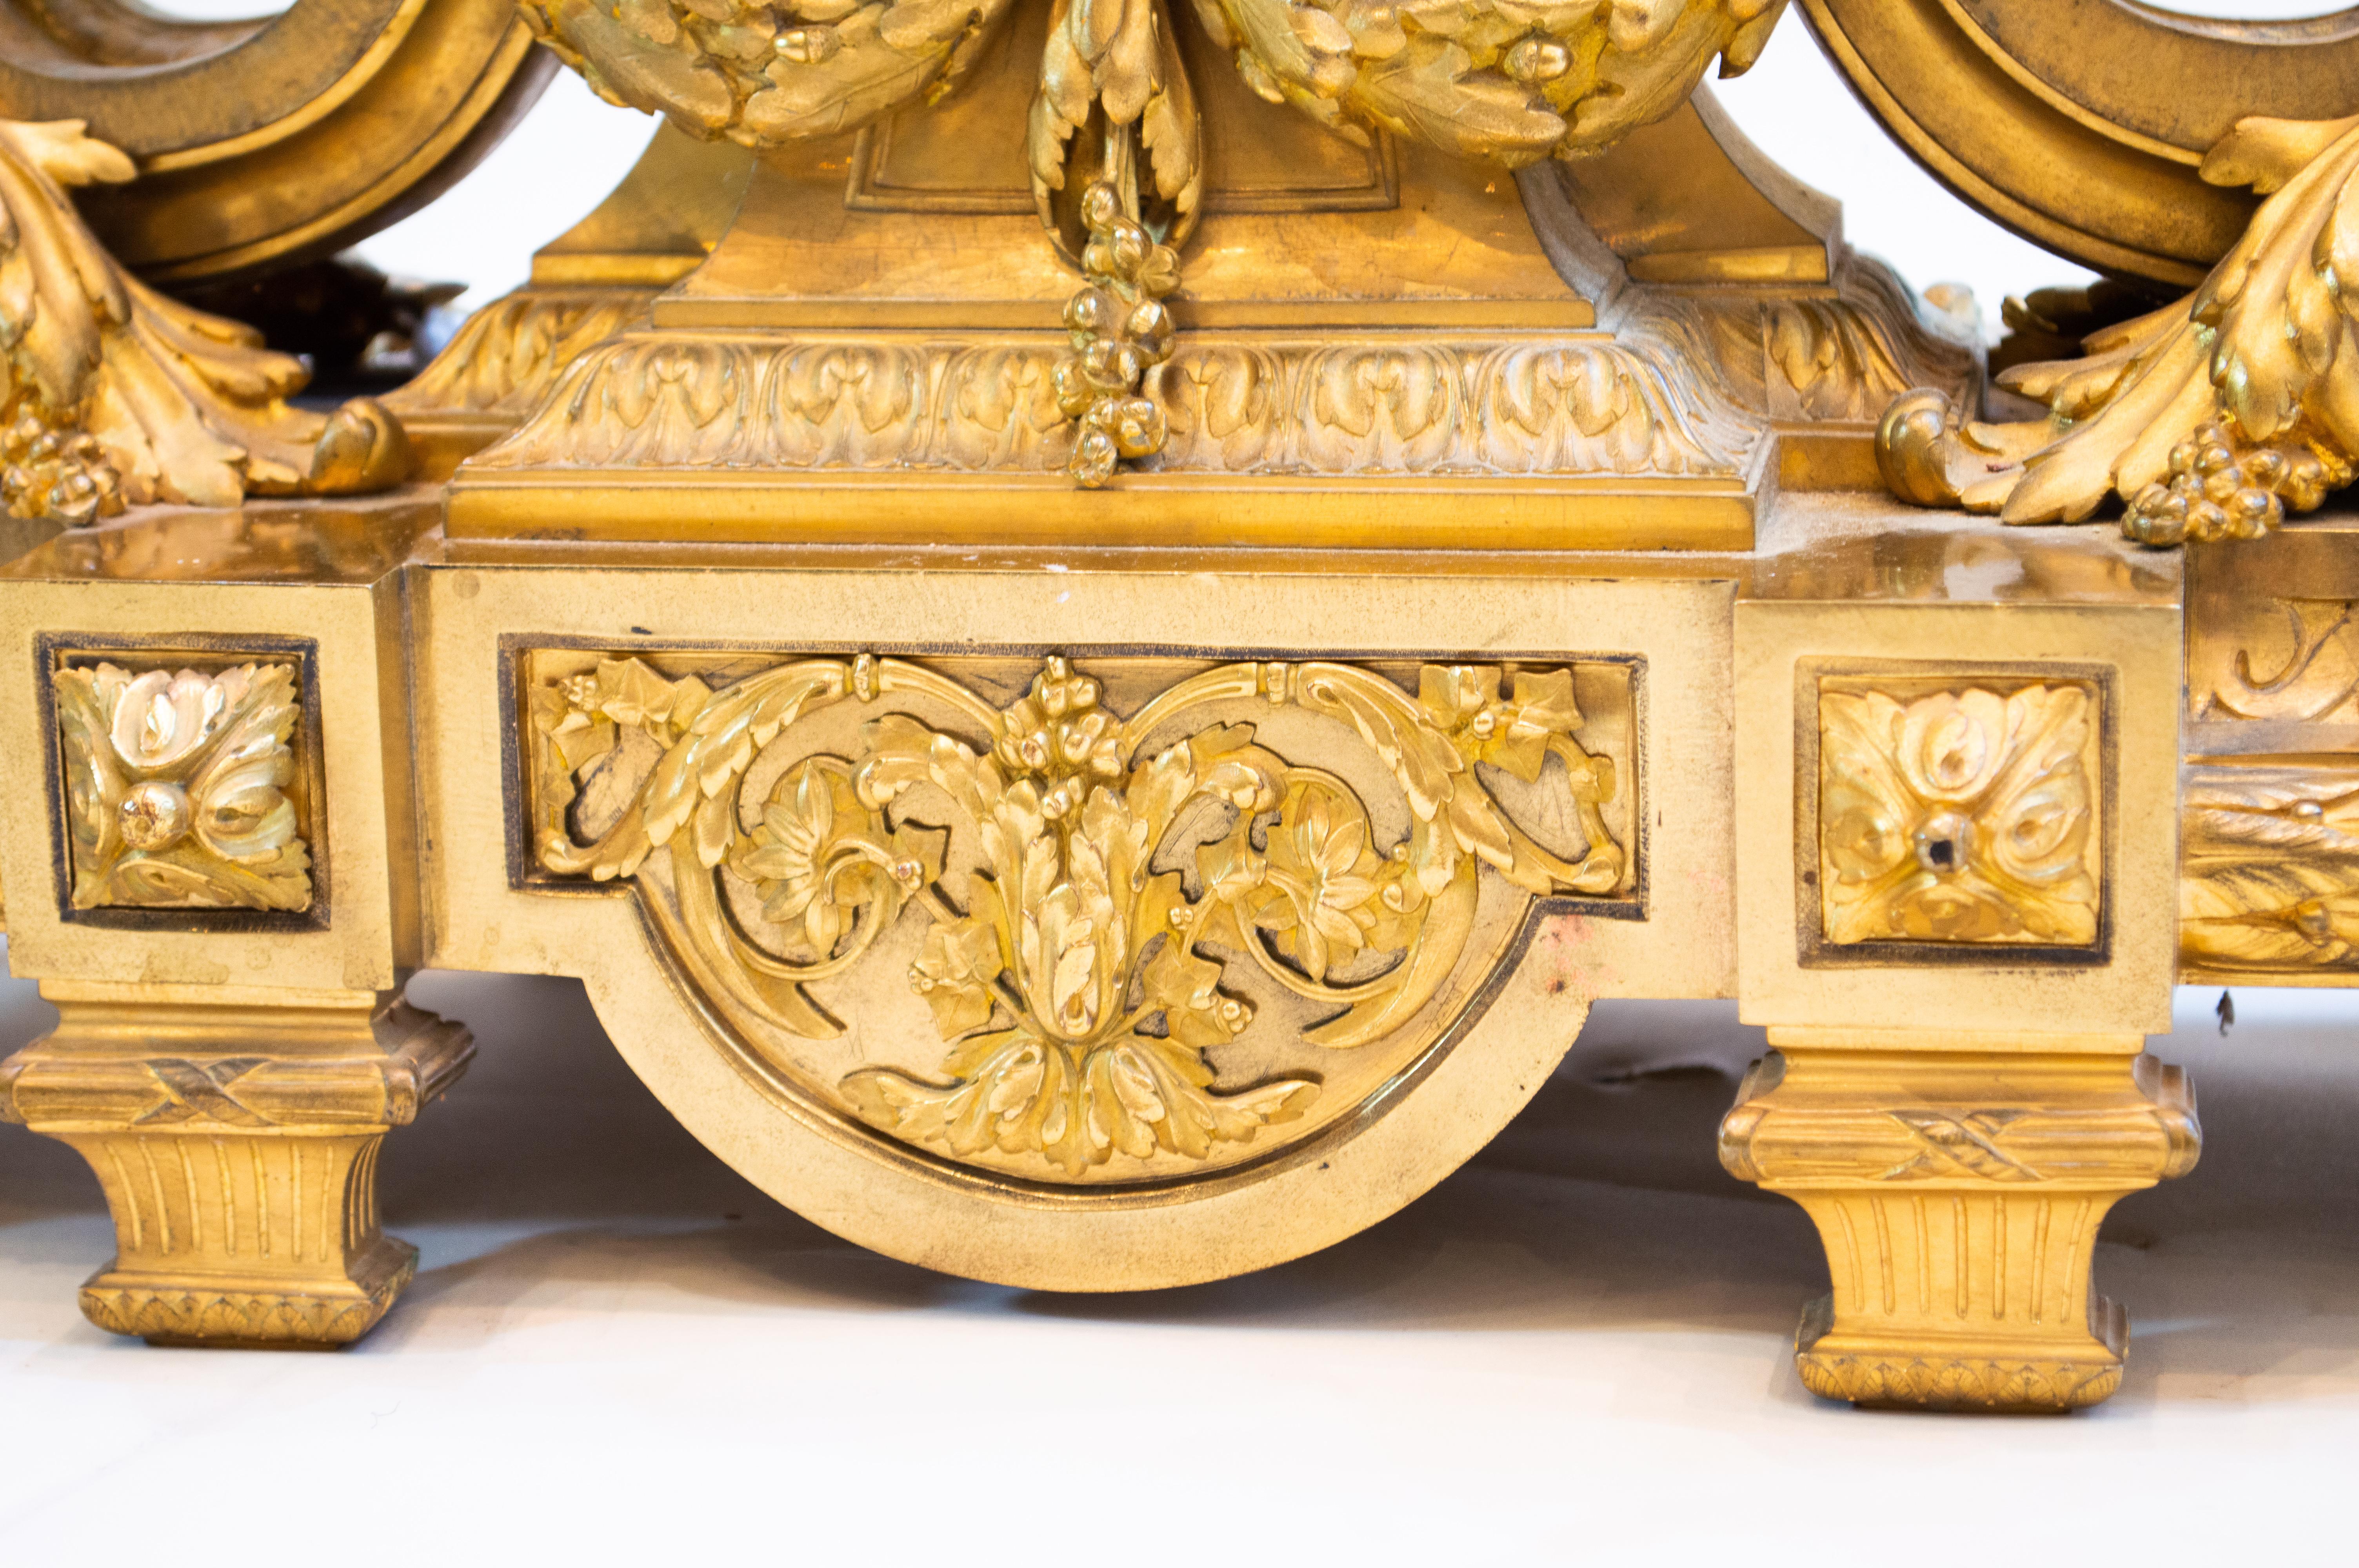 French ormolu three-piece clock garniture
Comprising a mantel clock and a pair of seven-light candelabra; the clock surmounted by a festooned vase above a circular dial signed F. Barbedienne / a Paris, on volute supports
Measures: clock 57 x